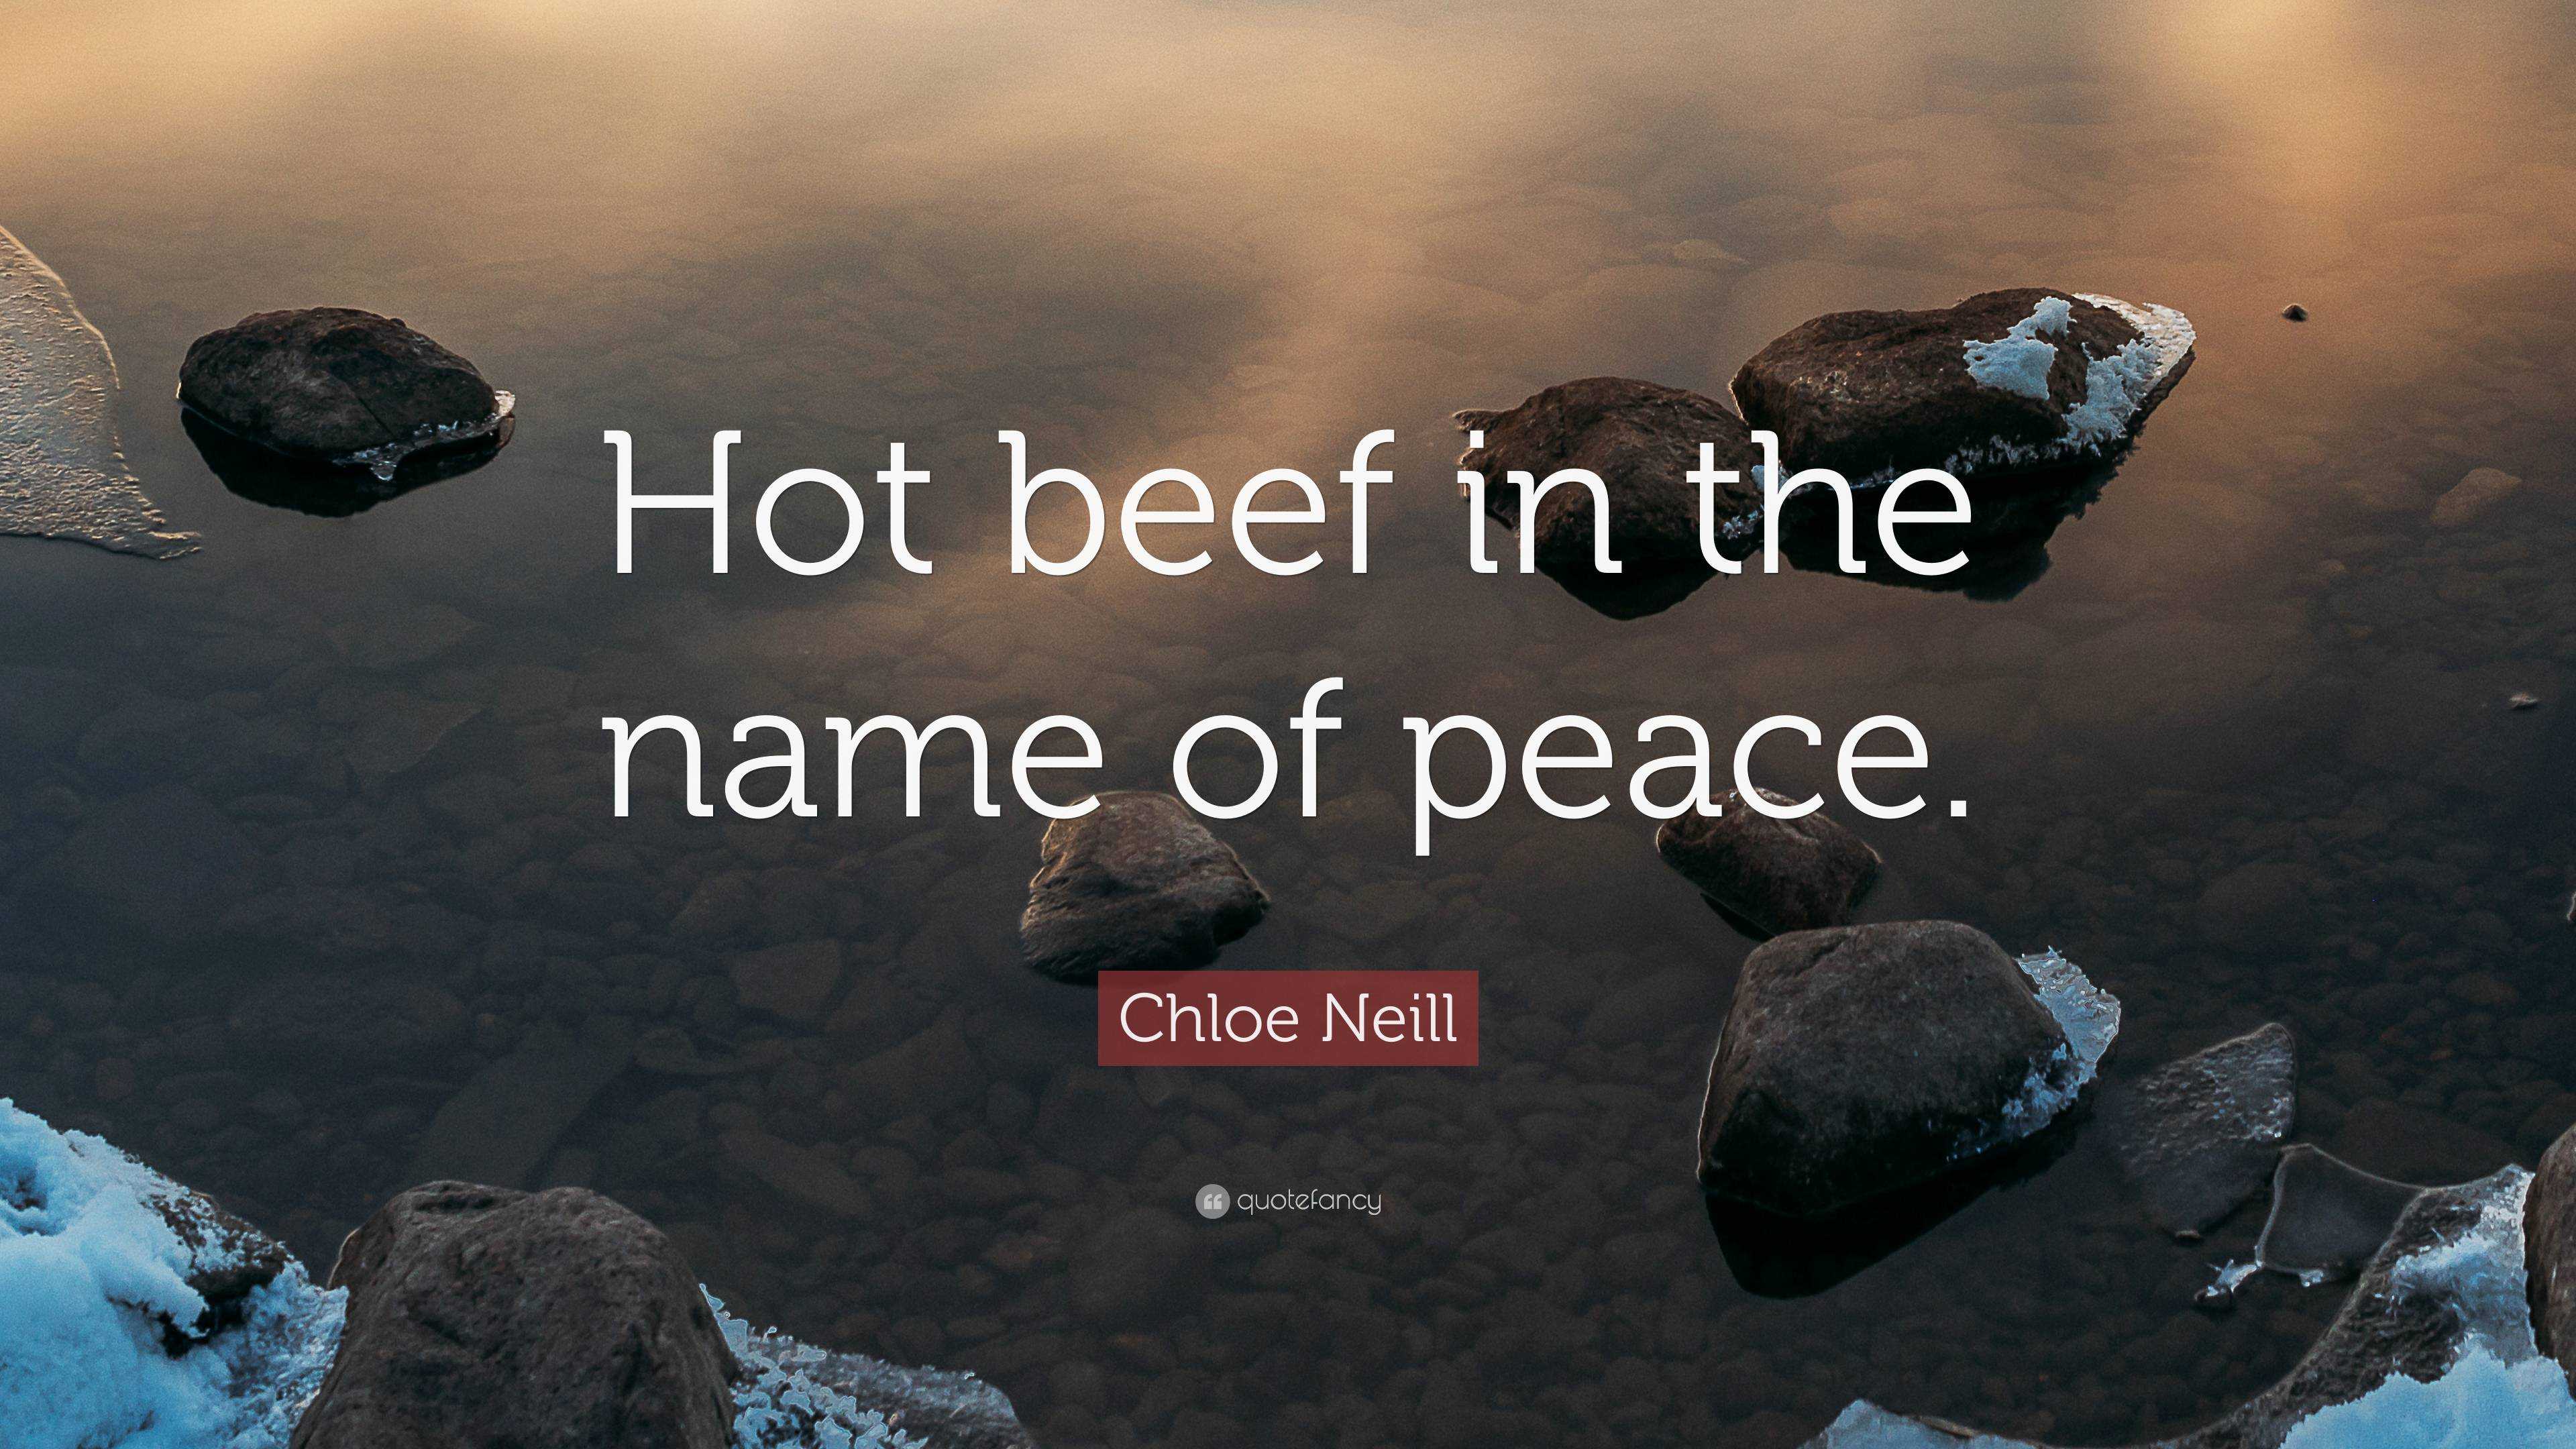 Chloe Neill Quote: “Hot beef in the name of peace.”